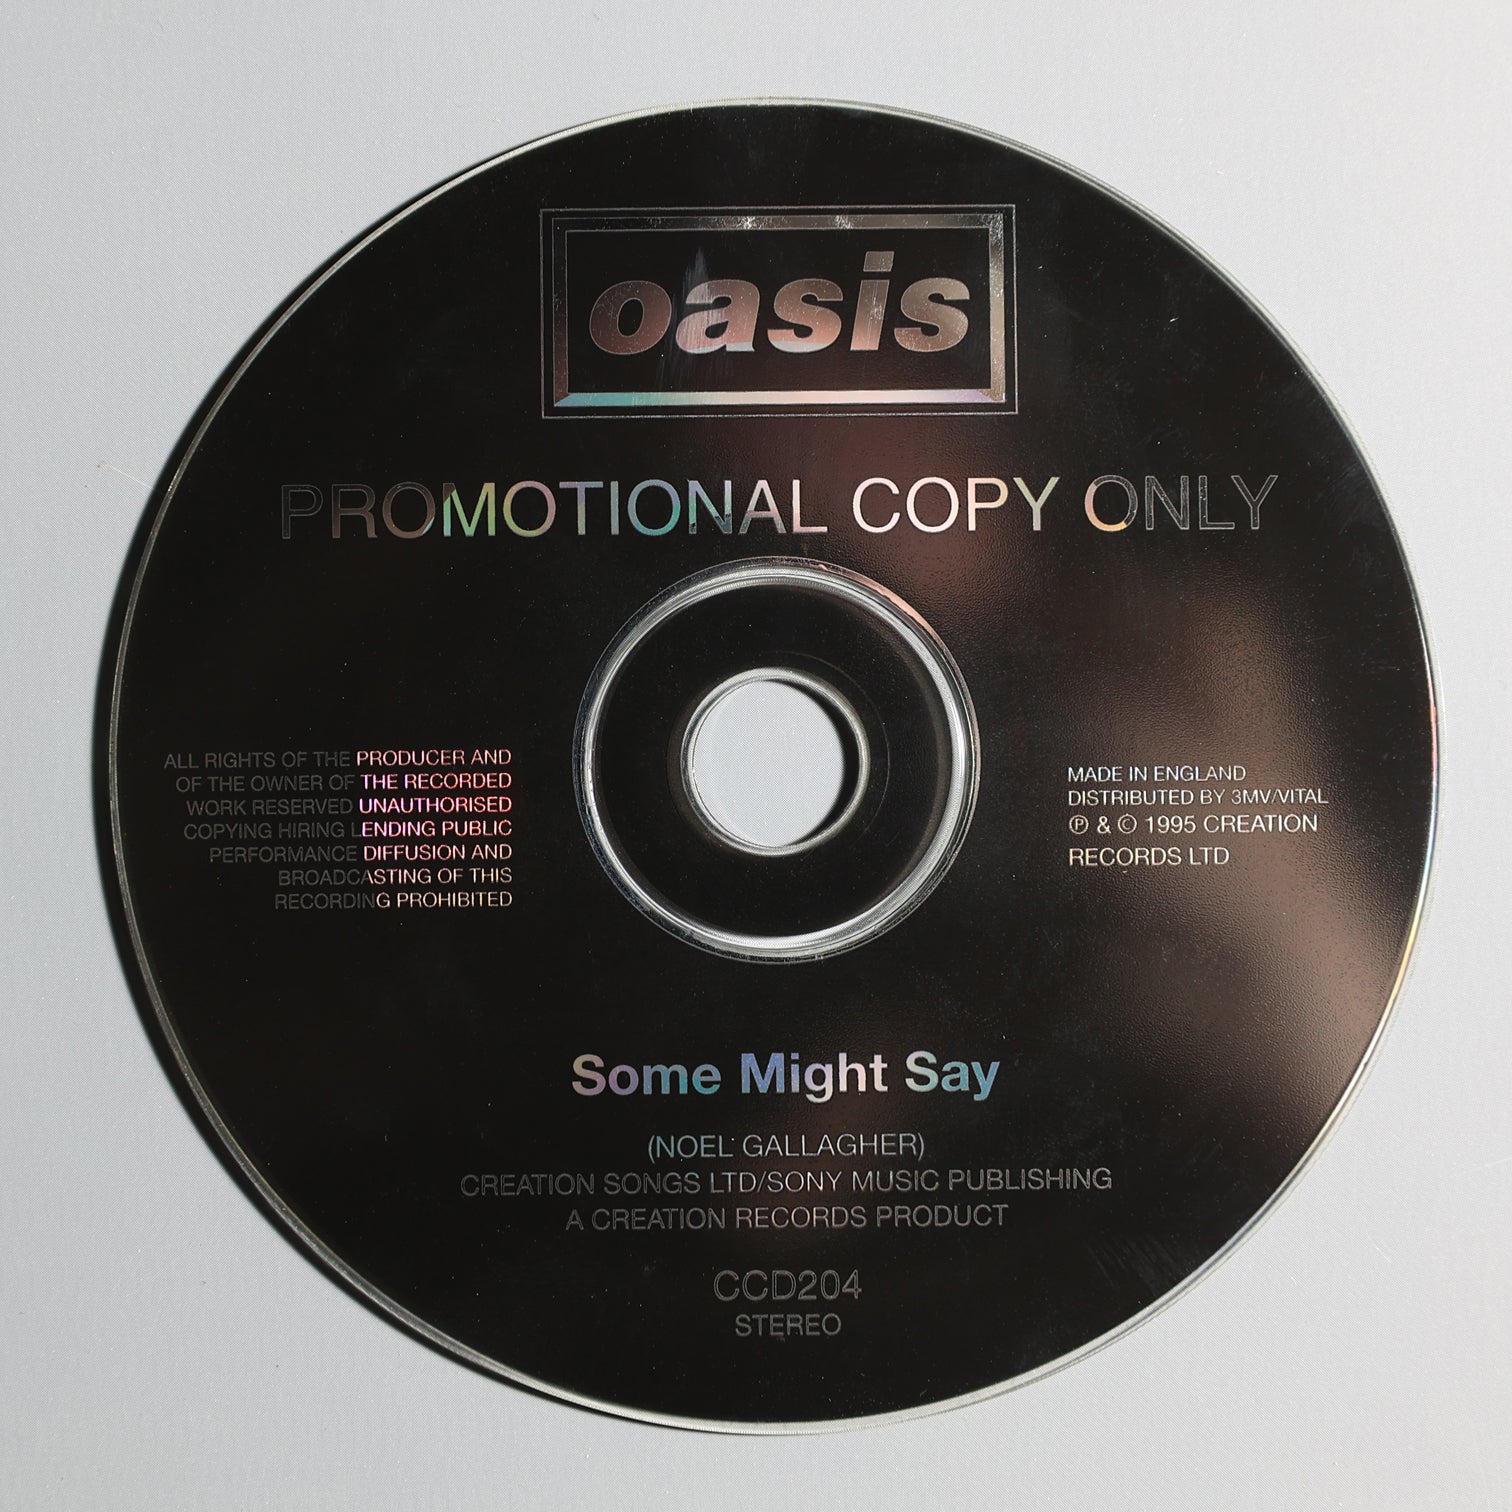 Oasis - Some Might Say promo CD - New Item